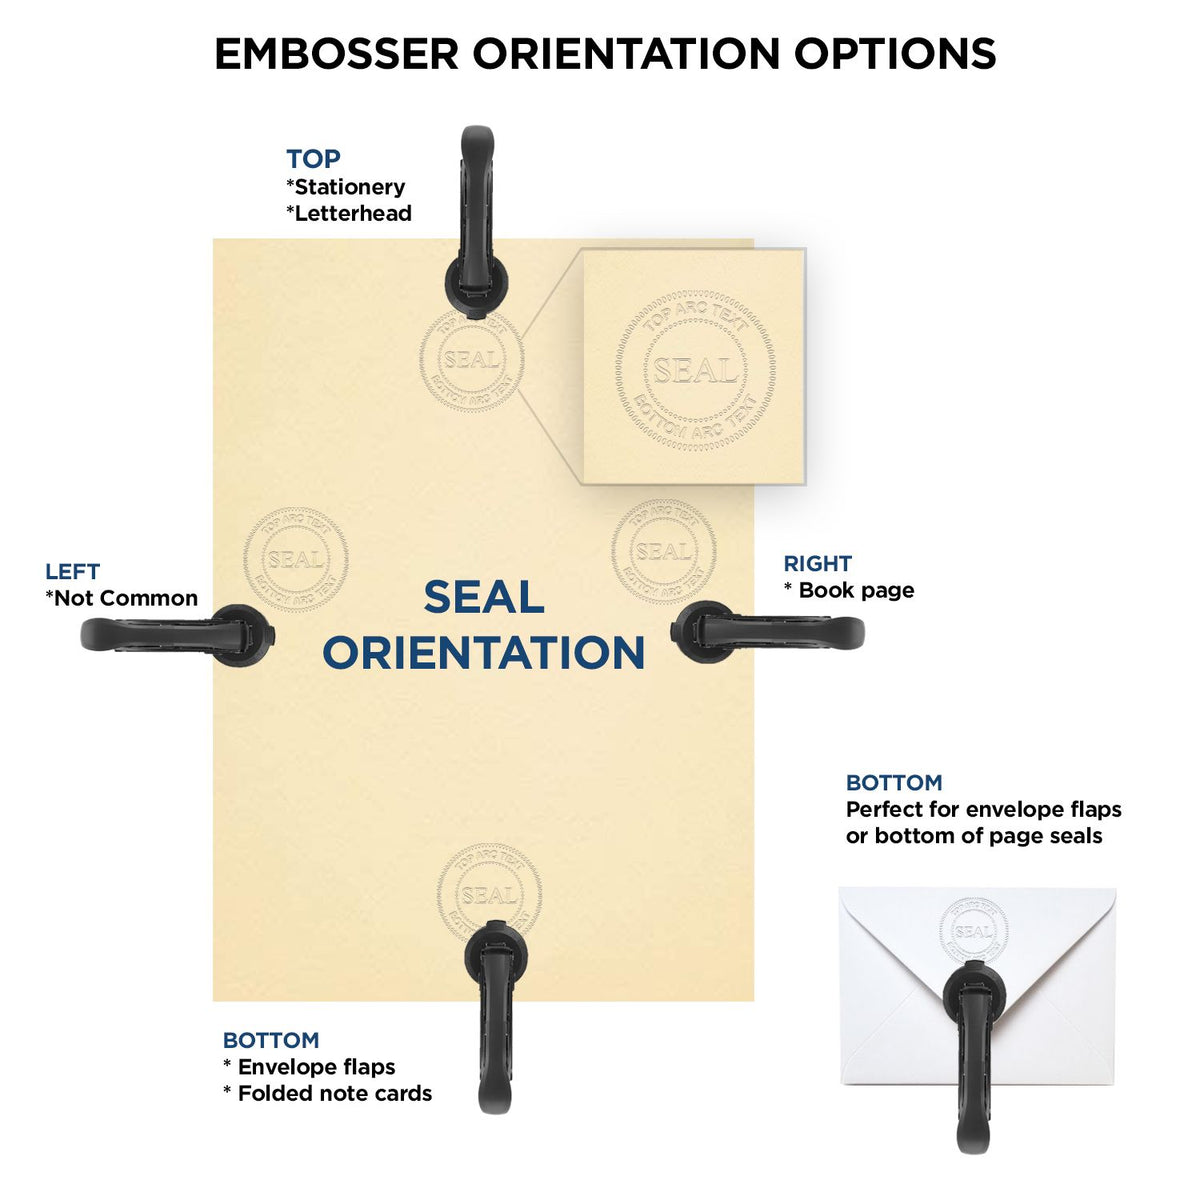 An infographic for the Hybrid South Carolina Land Surveyor Seal showing embosser orientation, this is showing examples of a top, bottom, right and left insert.